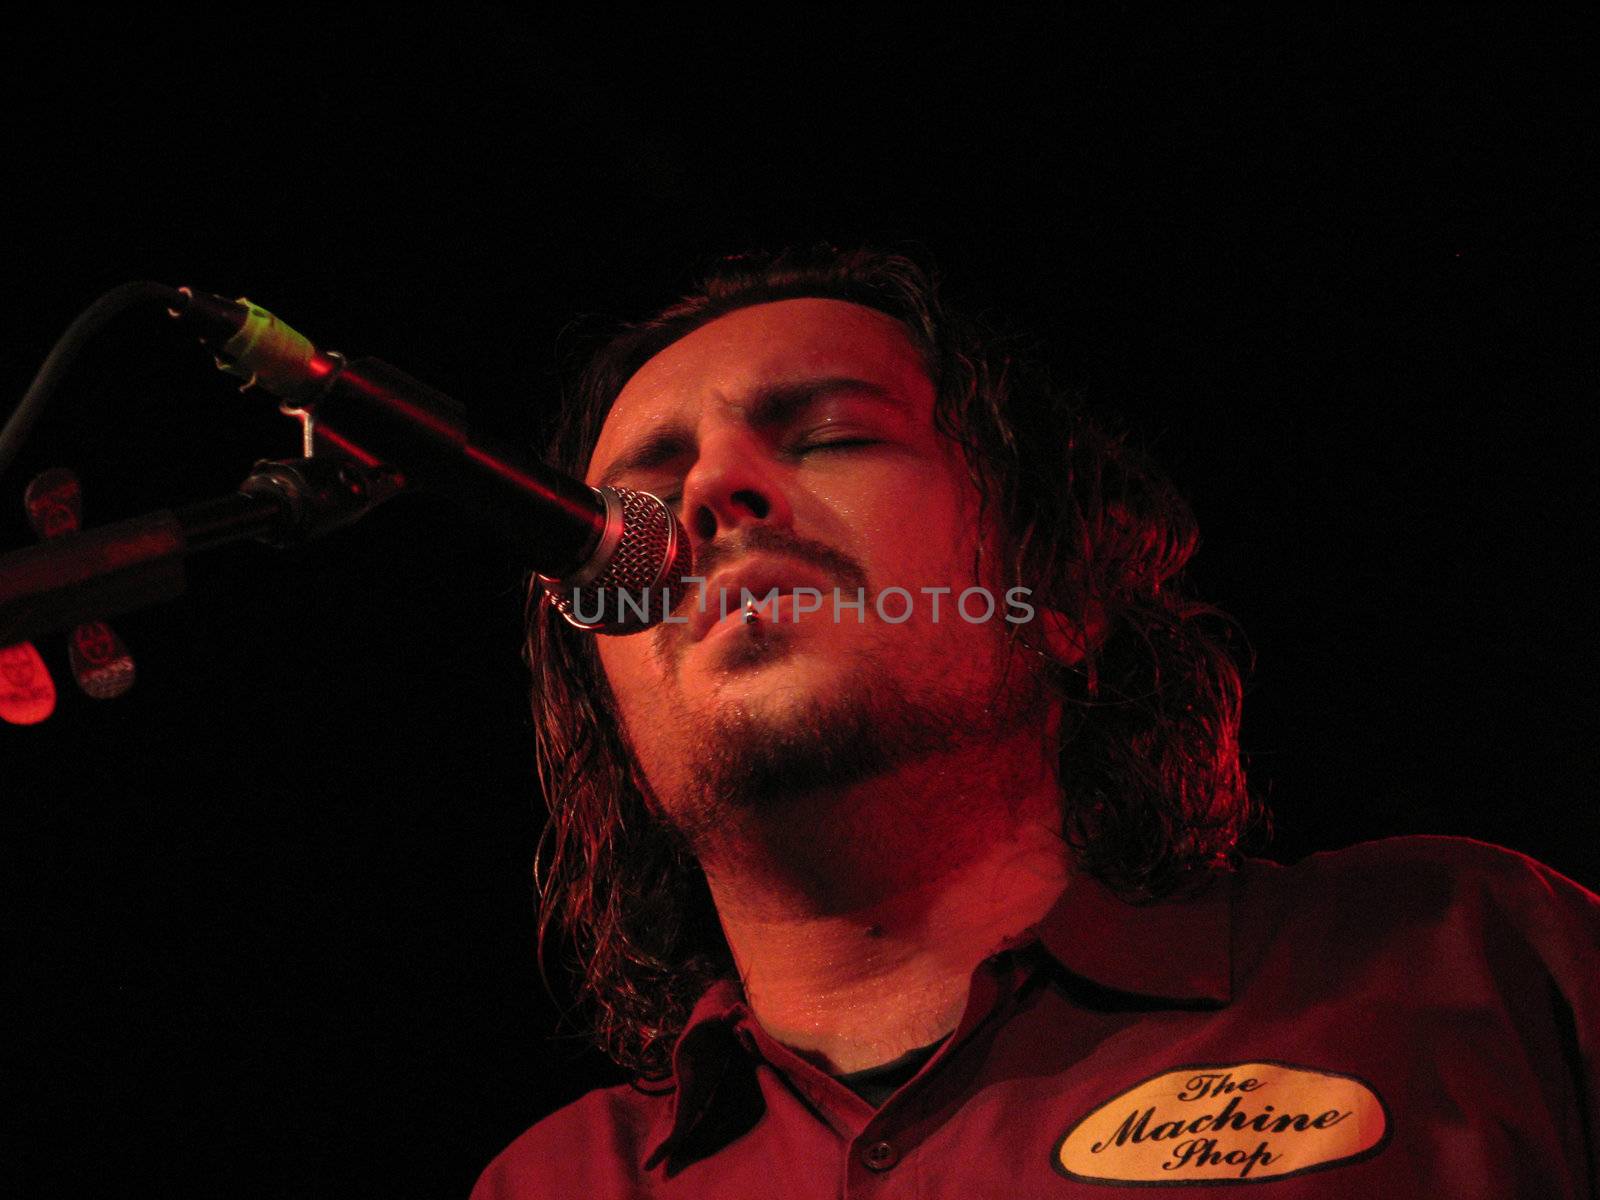 shaun morgan of seether playing in england by mmm